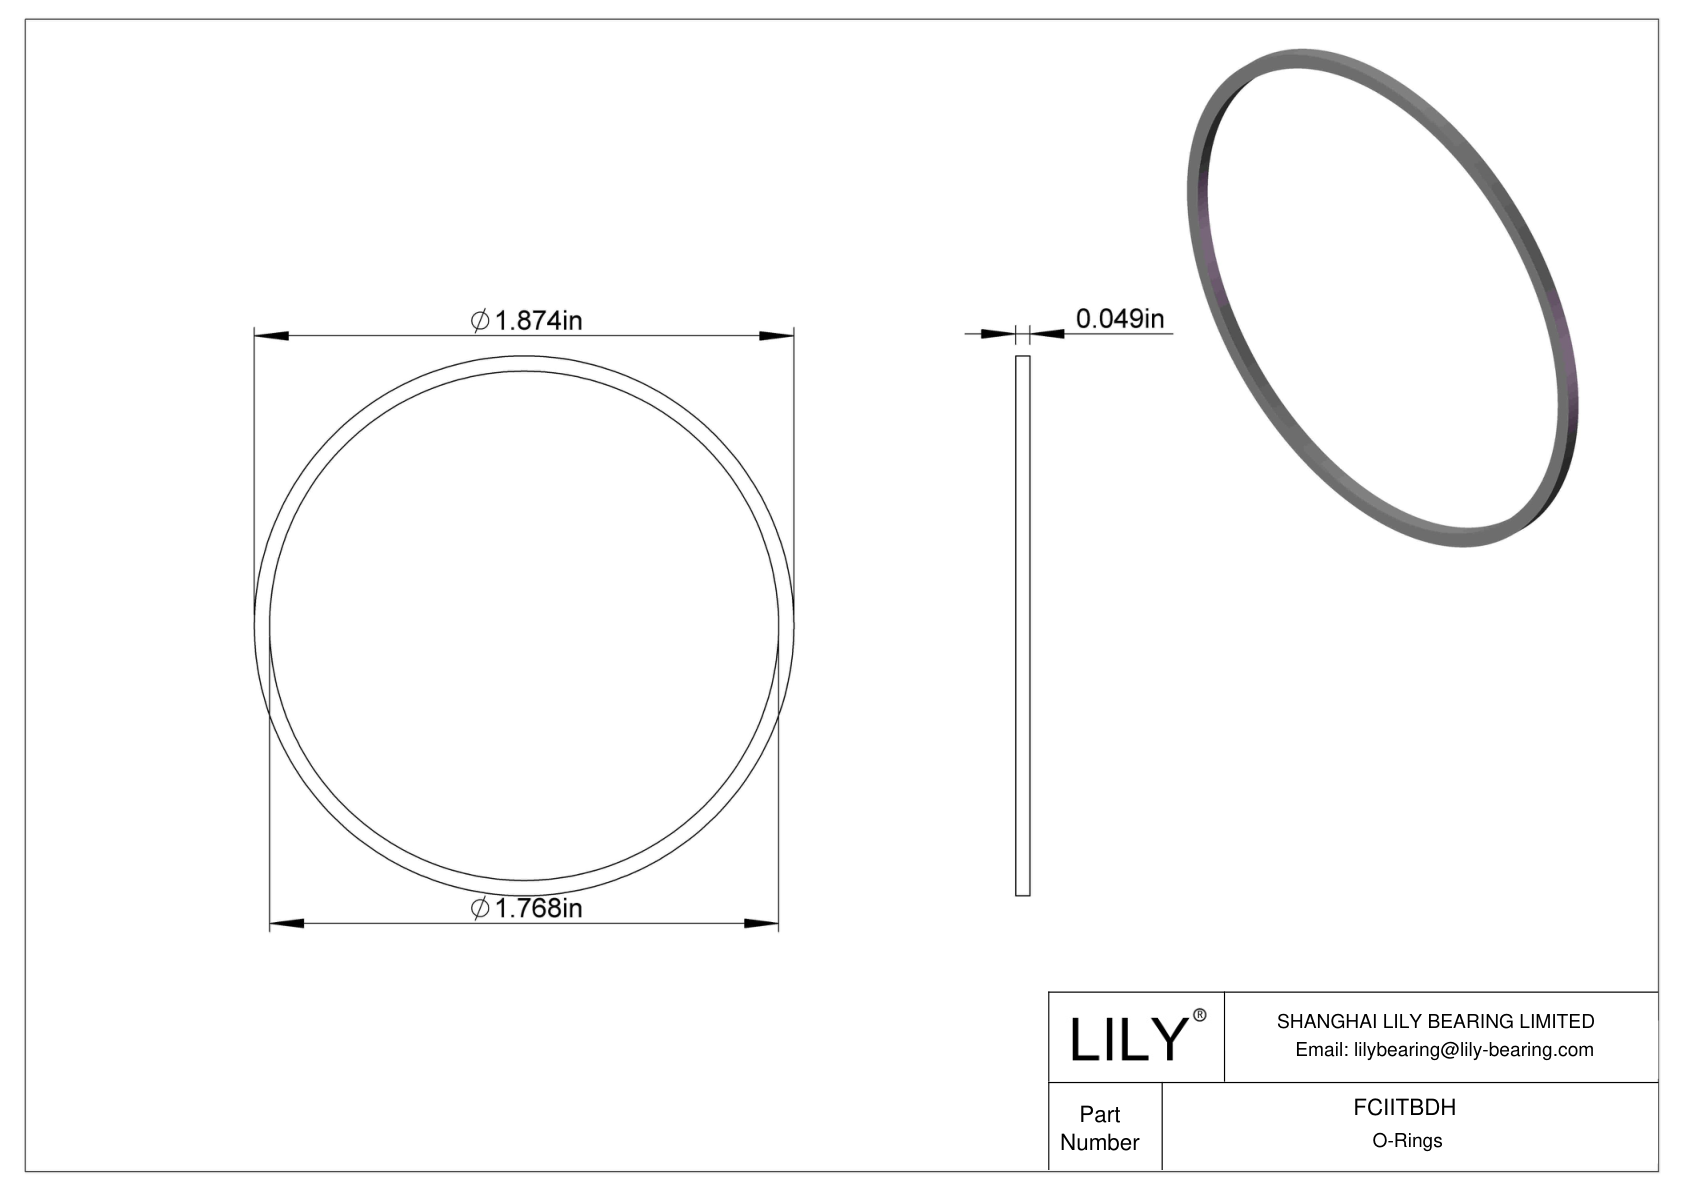 FCIITBDH O-Ring Backup Rings cad drawing